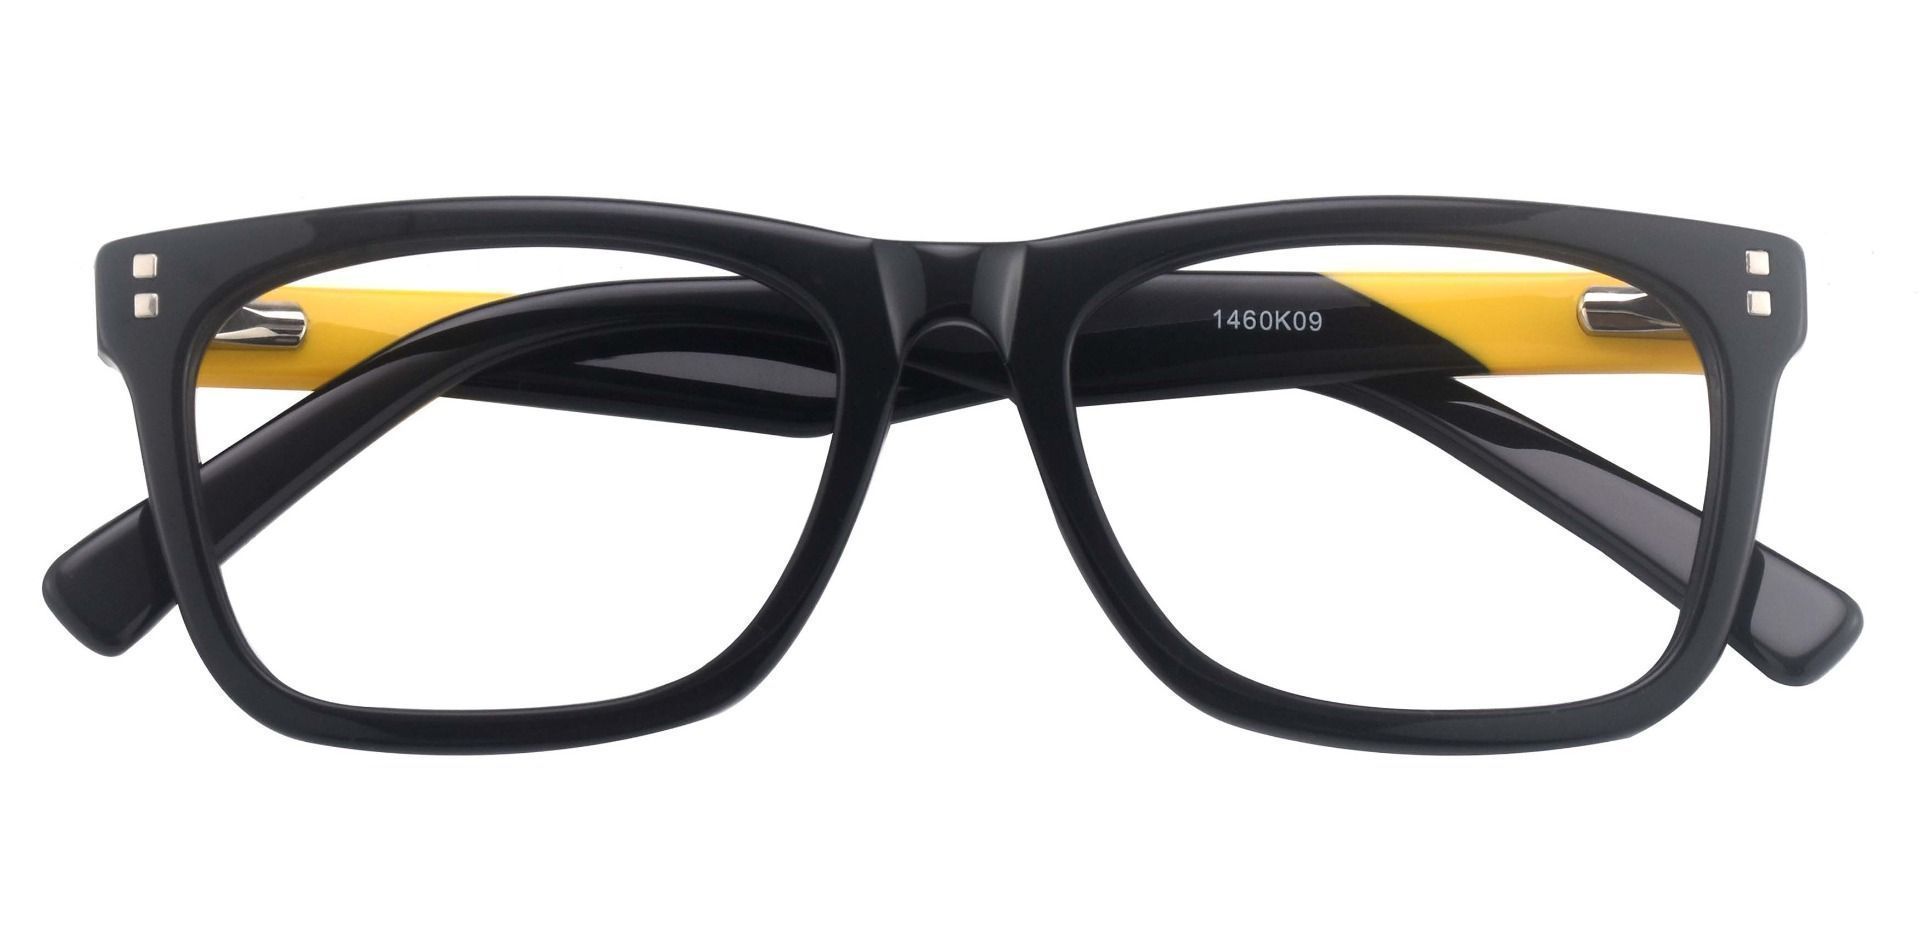 Liberty Rectangle Non-Rx Glasses - The Frame Is Black And Gold